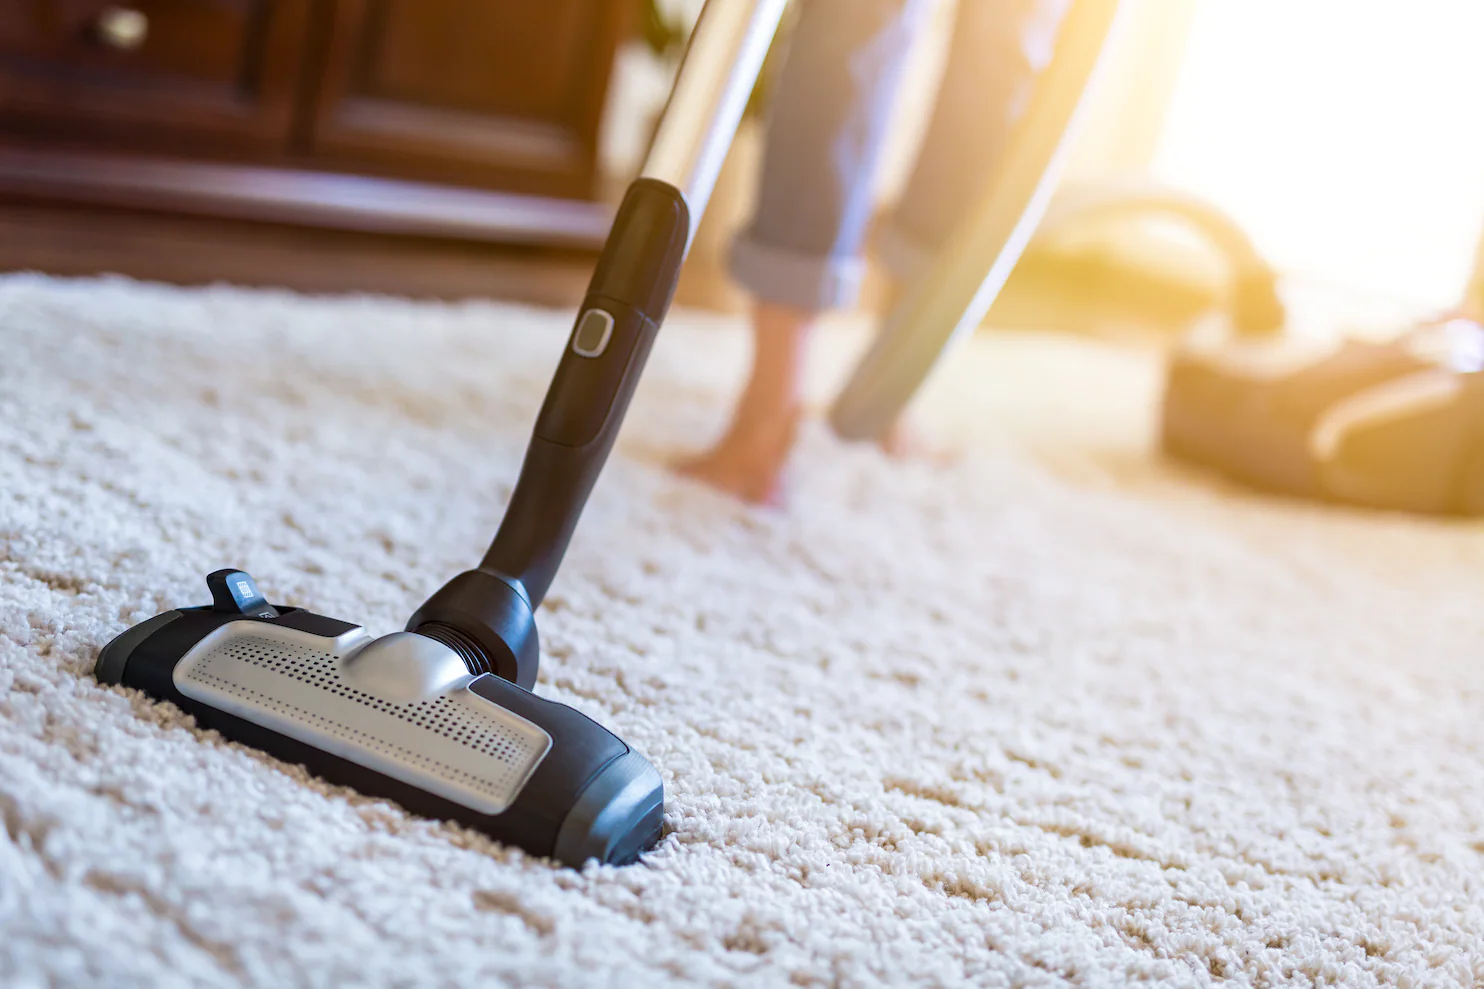 Carpet Cleaning Business